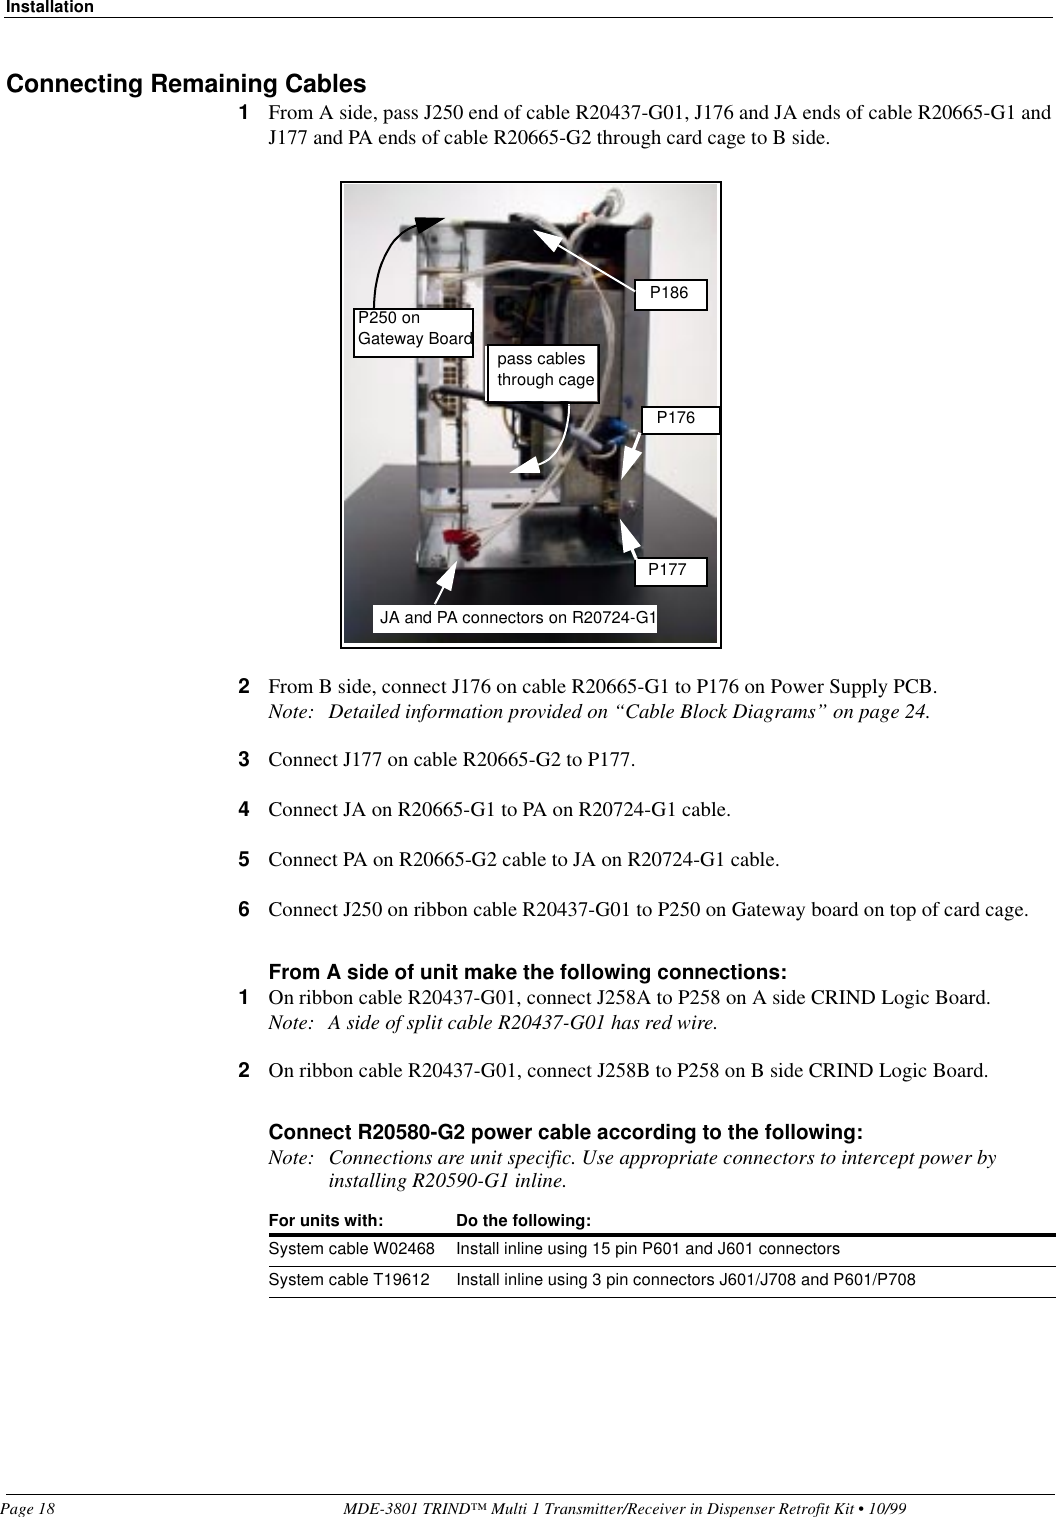 InstallationPage 18 MDE-3801 TRIND™ Multi 1 Transmitter/Receiver in Dispenser Retrofit Kit • 10/99Connecting Remaining Cables1From A side, pass J250 end of cable R20437-G01, J176 and JA ends of cable R20665-G1 and J177 and PA ends of cable R20665-G2 through card cage to B side.2From B side, connect J176 on cable R20665-G1 to P176 on Power Supply PCB.Note: Detailed information provided on “Cable Block Diagrams” on page 24.3Connect J177 on cable R20665-G2 to P177.4Connect JA on R20665-G1 to PA on R20724-G1 cable.5Connect PA on R20665-G2 cable to JA on R20724-G1 cable.6Connect J250 on ribbon cable R20437-G01 to P250 on Gateway board on top of card cage.From A side of unit make the following connections:1On ribbon cable R20437-G01, connect J258A to P258 on A side CRIND Logic Board.Note: A side of split cable R20437-G01 has red wire.2On ribbon cable R20437-G01, connect J258B to P258 on B side CRIND Logic Board.Connect R20580-G2 power cable according to the following:Note: Connections are unit specific. Use appropriate connectors to intercept power by installing R20590-G1 inline.For units with: Do the following:System cable W02468 Install inline using 15 pin P601 and J601 connectorsSystem cable T19612 Install inline using 3 pin connectors J601/J708 and P601/P708P186P176P177JA and PA connectors on R20724-G1pass cables through cageP250 on Gateway Board